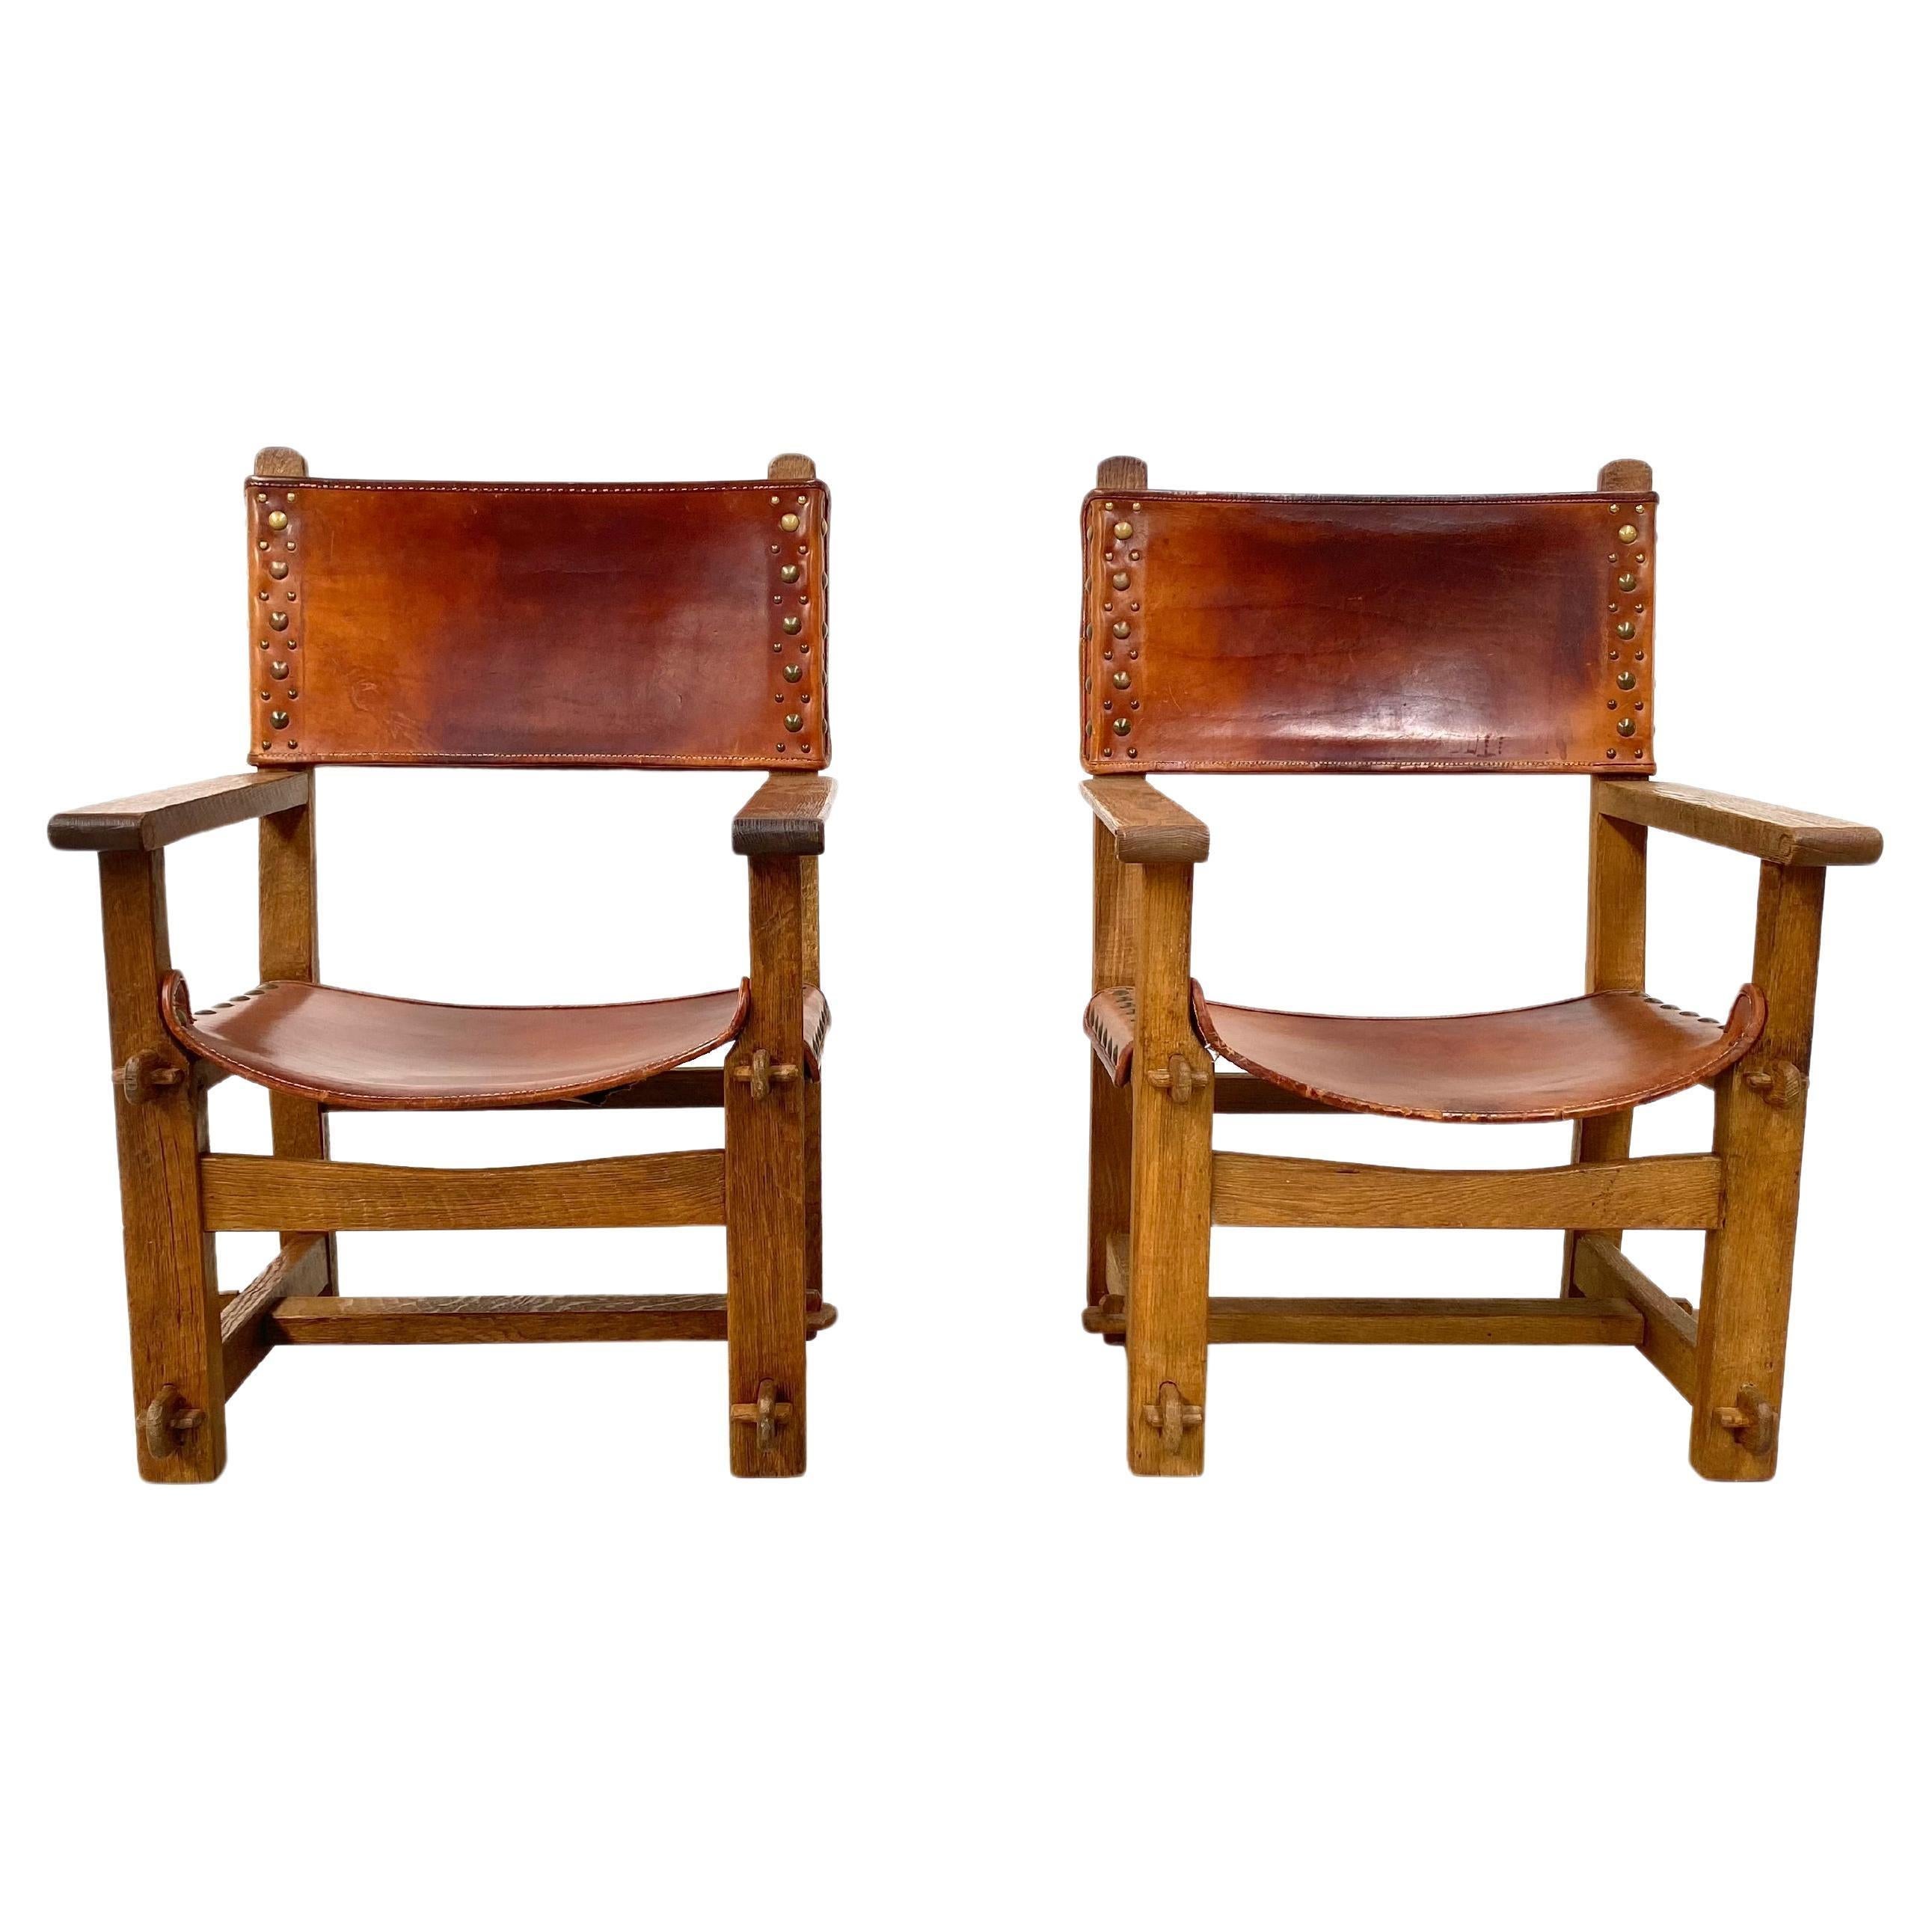 Set of 2 Antique Castle Chairs in thick Cognac leather and oak wood. It was handmade in France in the late twenties. Handmade only from wood and leather. The patinated solid oak frame is handcrafted and the connections are made with wooden bobbins